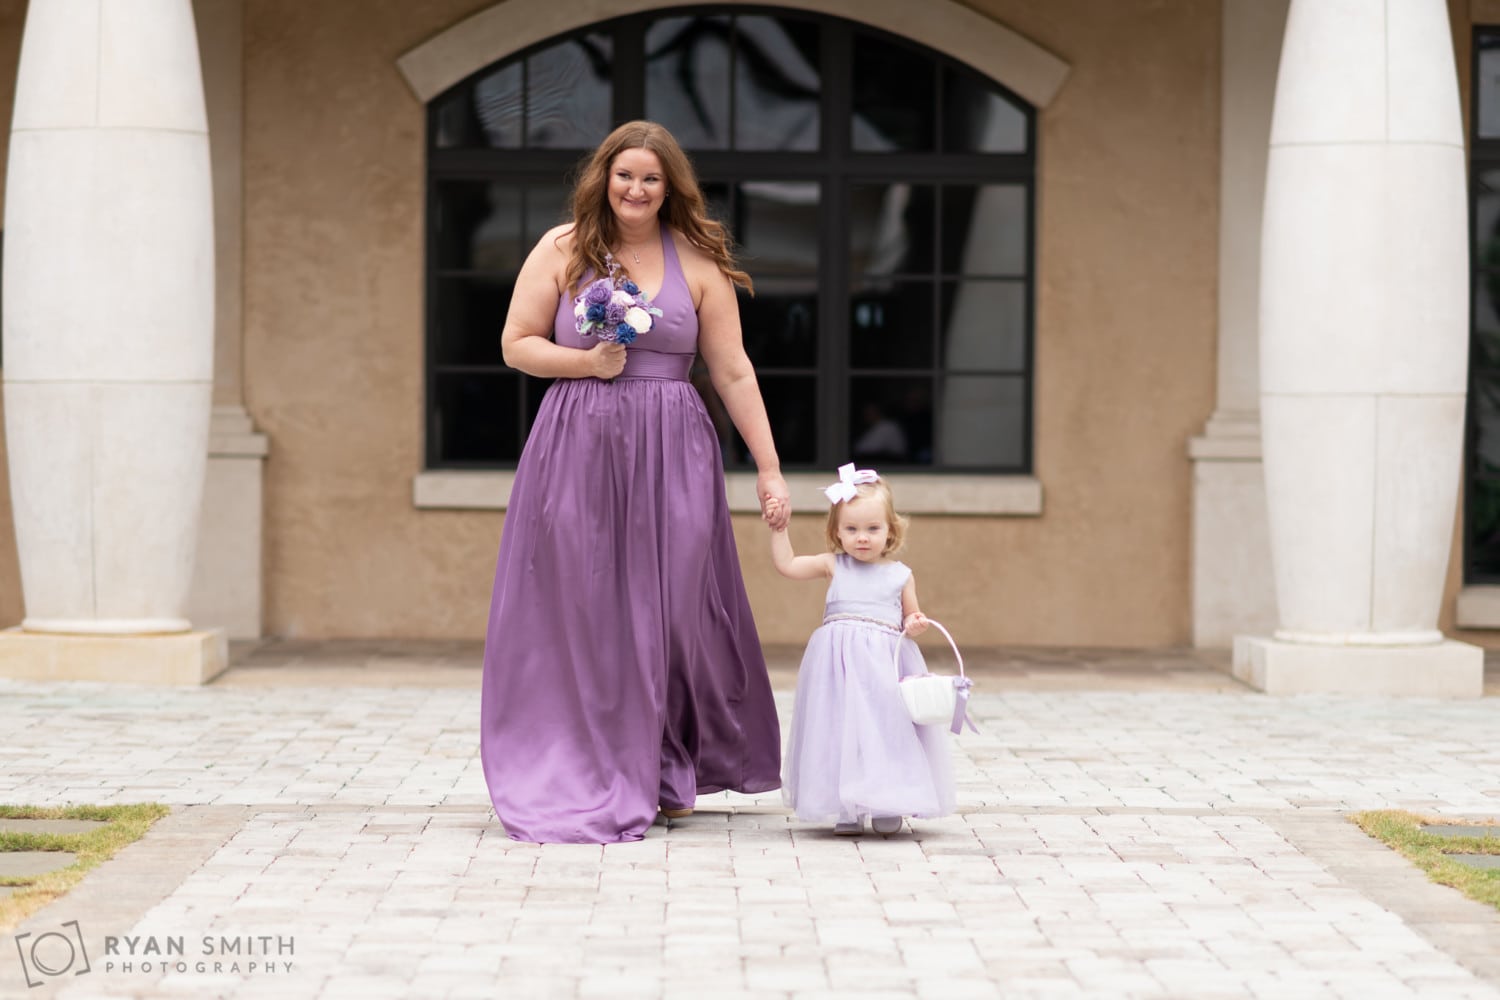 Flower girl walking with mother - 21 Main Events